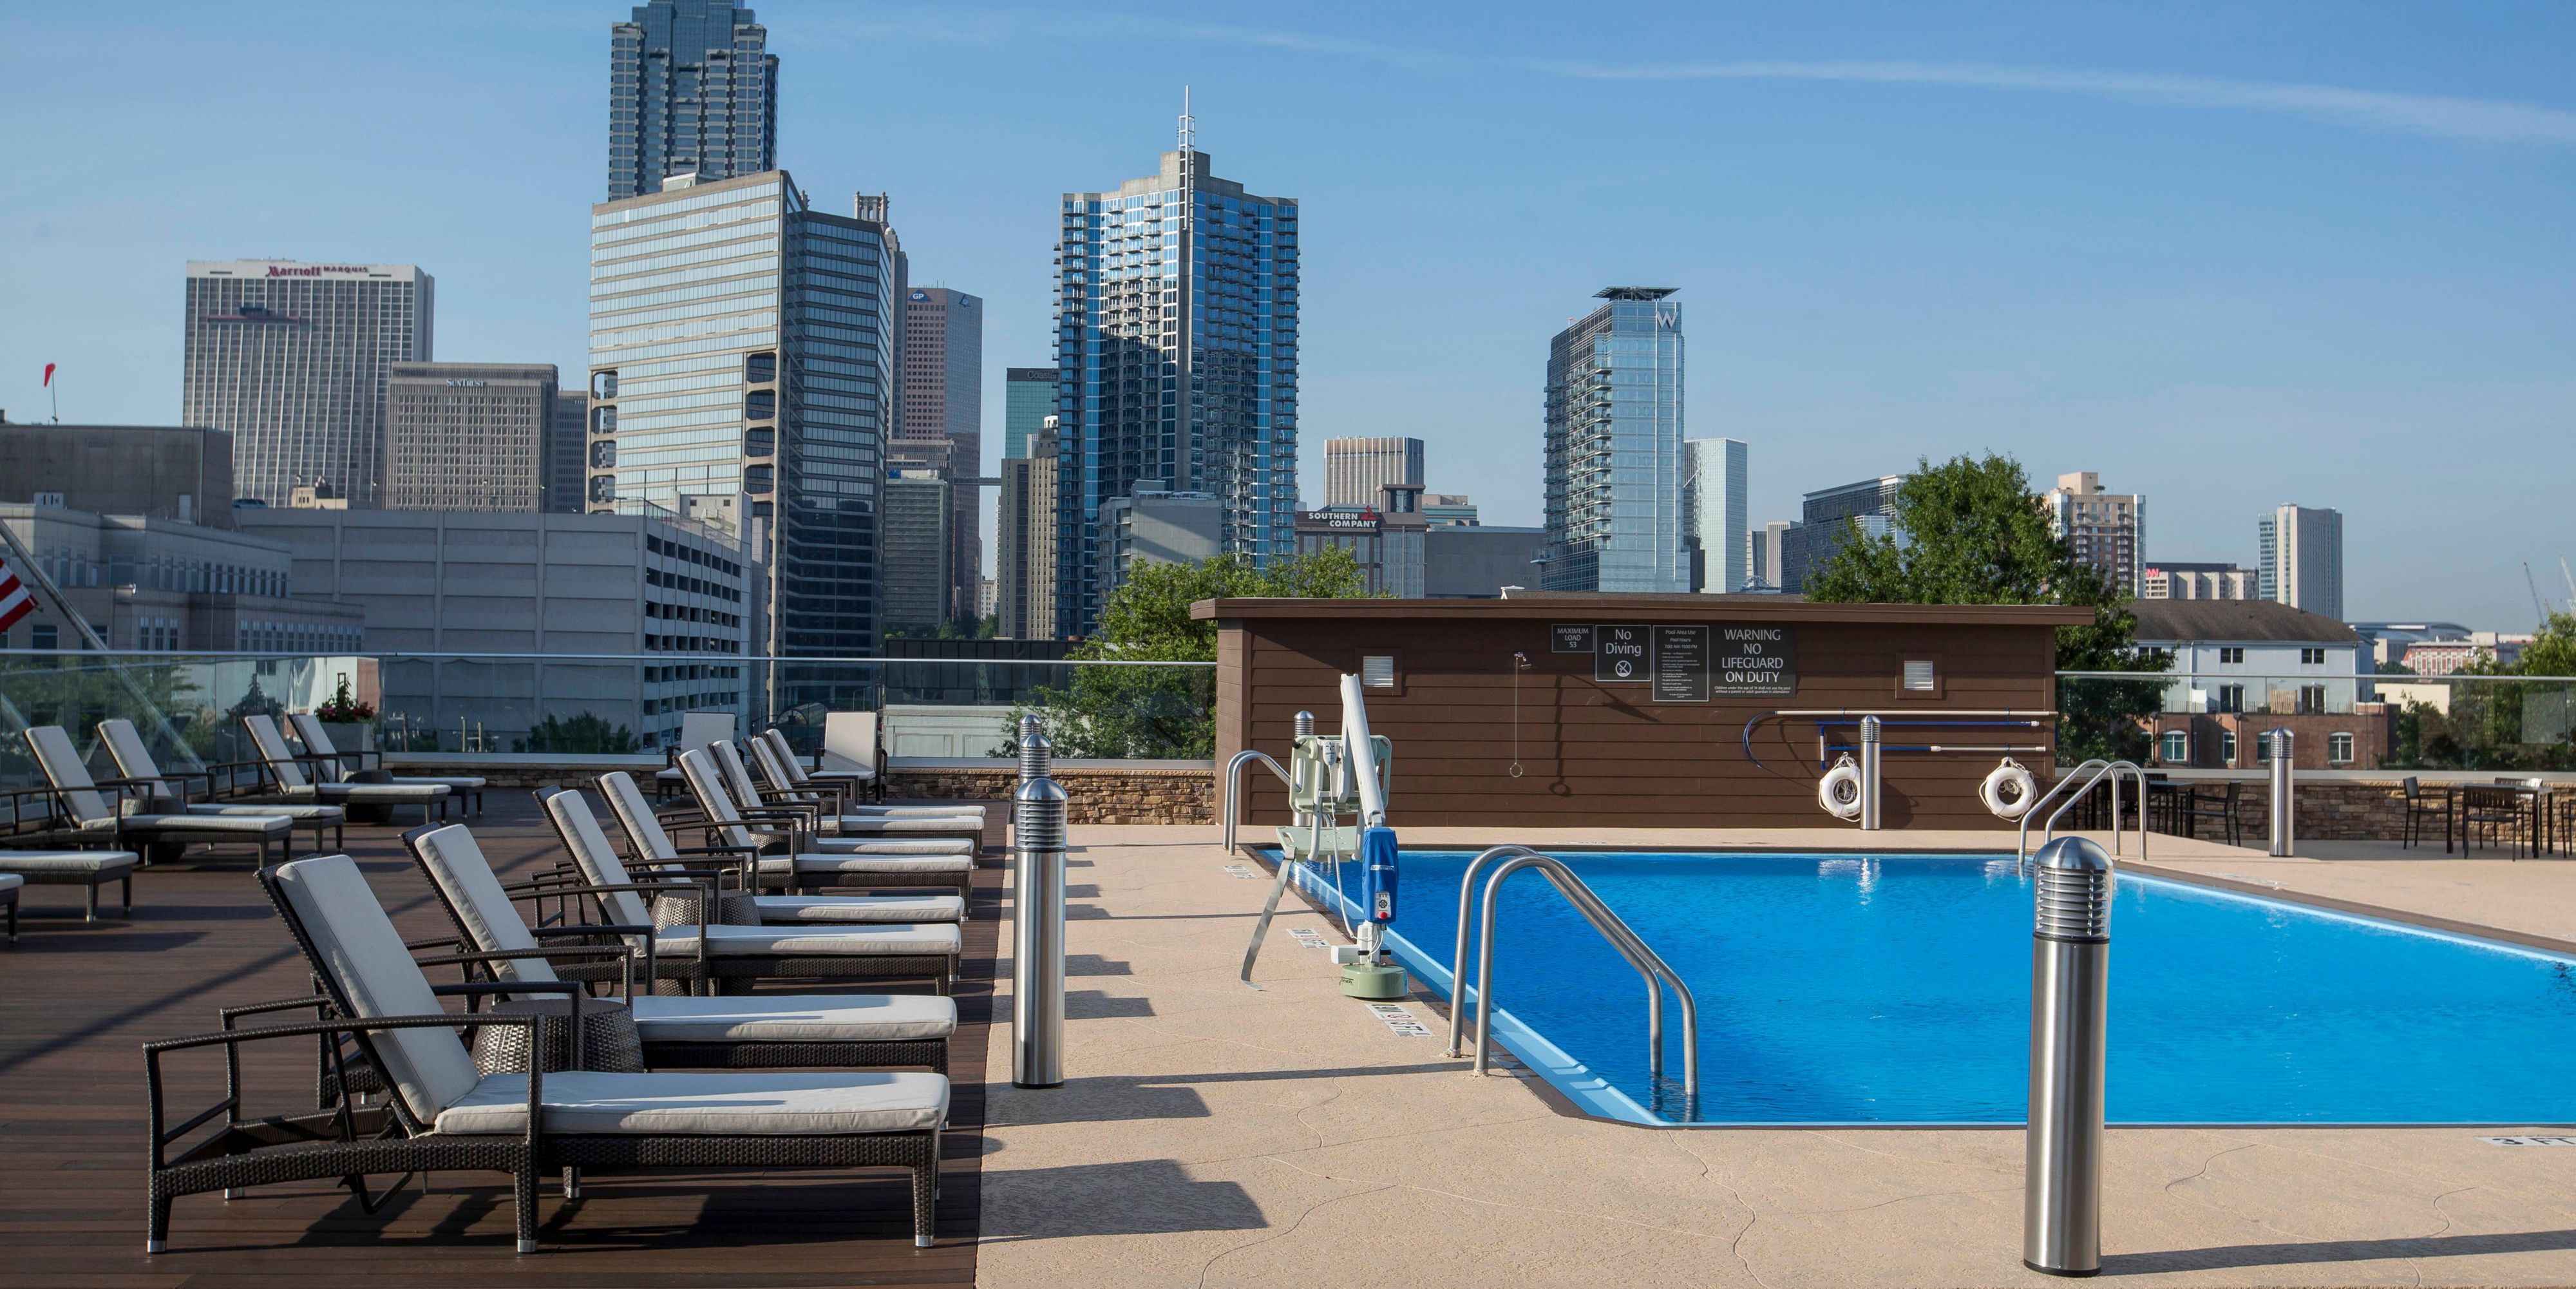 Our outdoor pool in Atlanta is the perfect place to relax and recharge